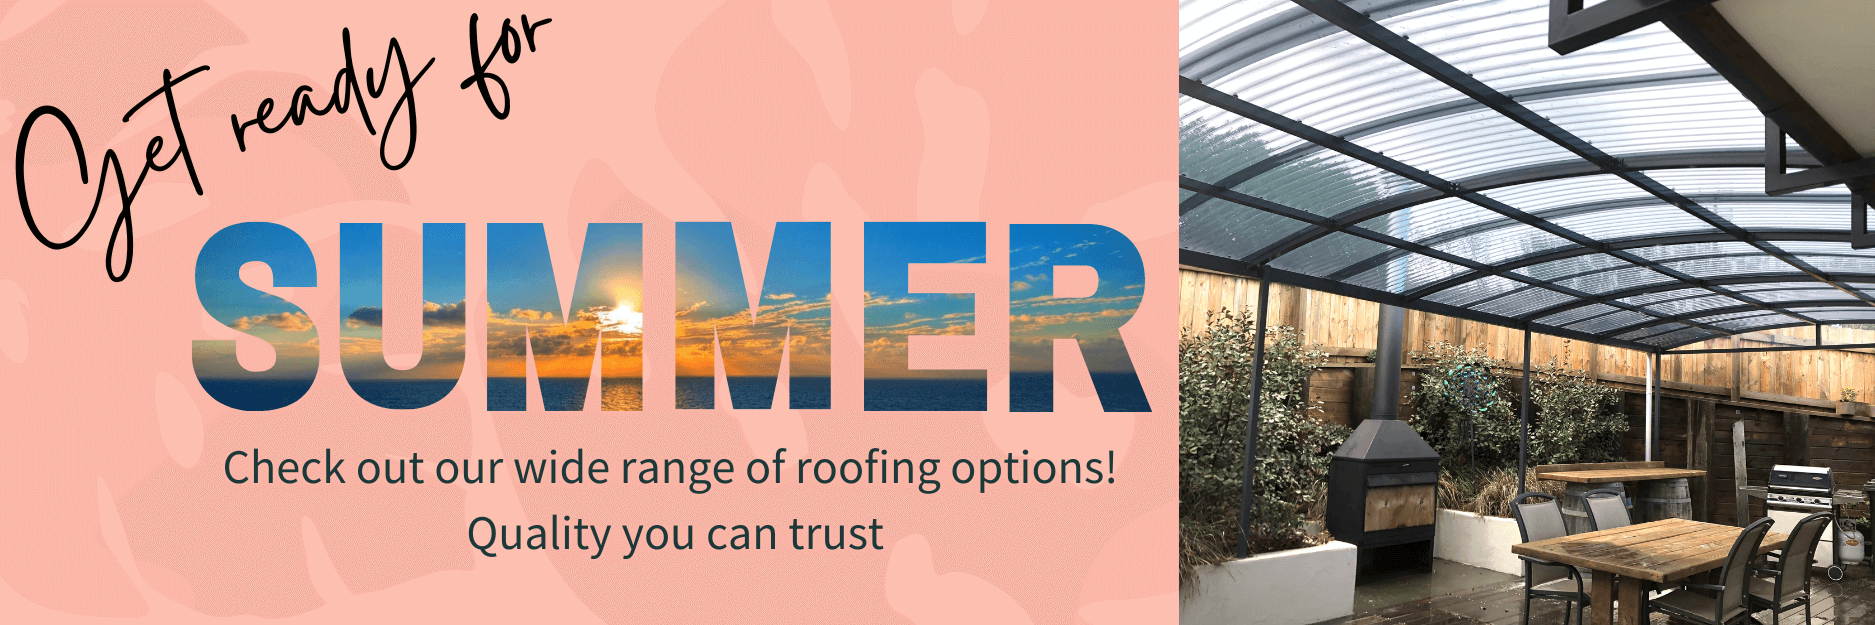 Get ready for summer with Supreme Plastic Roofing